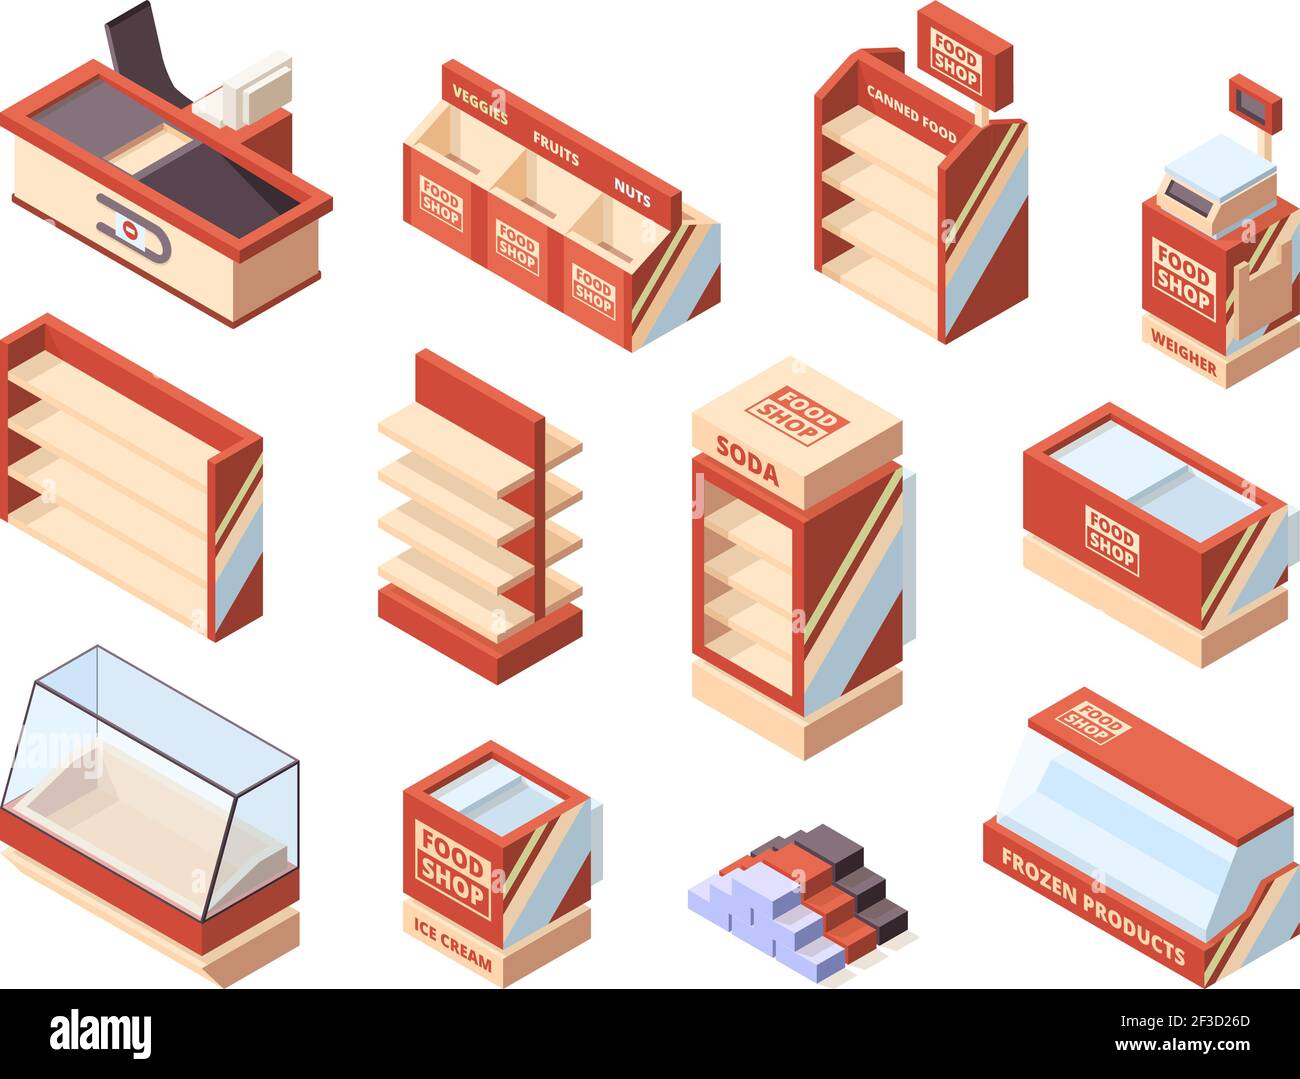 Grocery store furniture. Checkout tables shelves shopping carts fridges supermarket isometric items vector Stock Vector